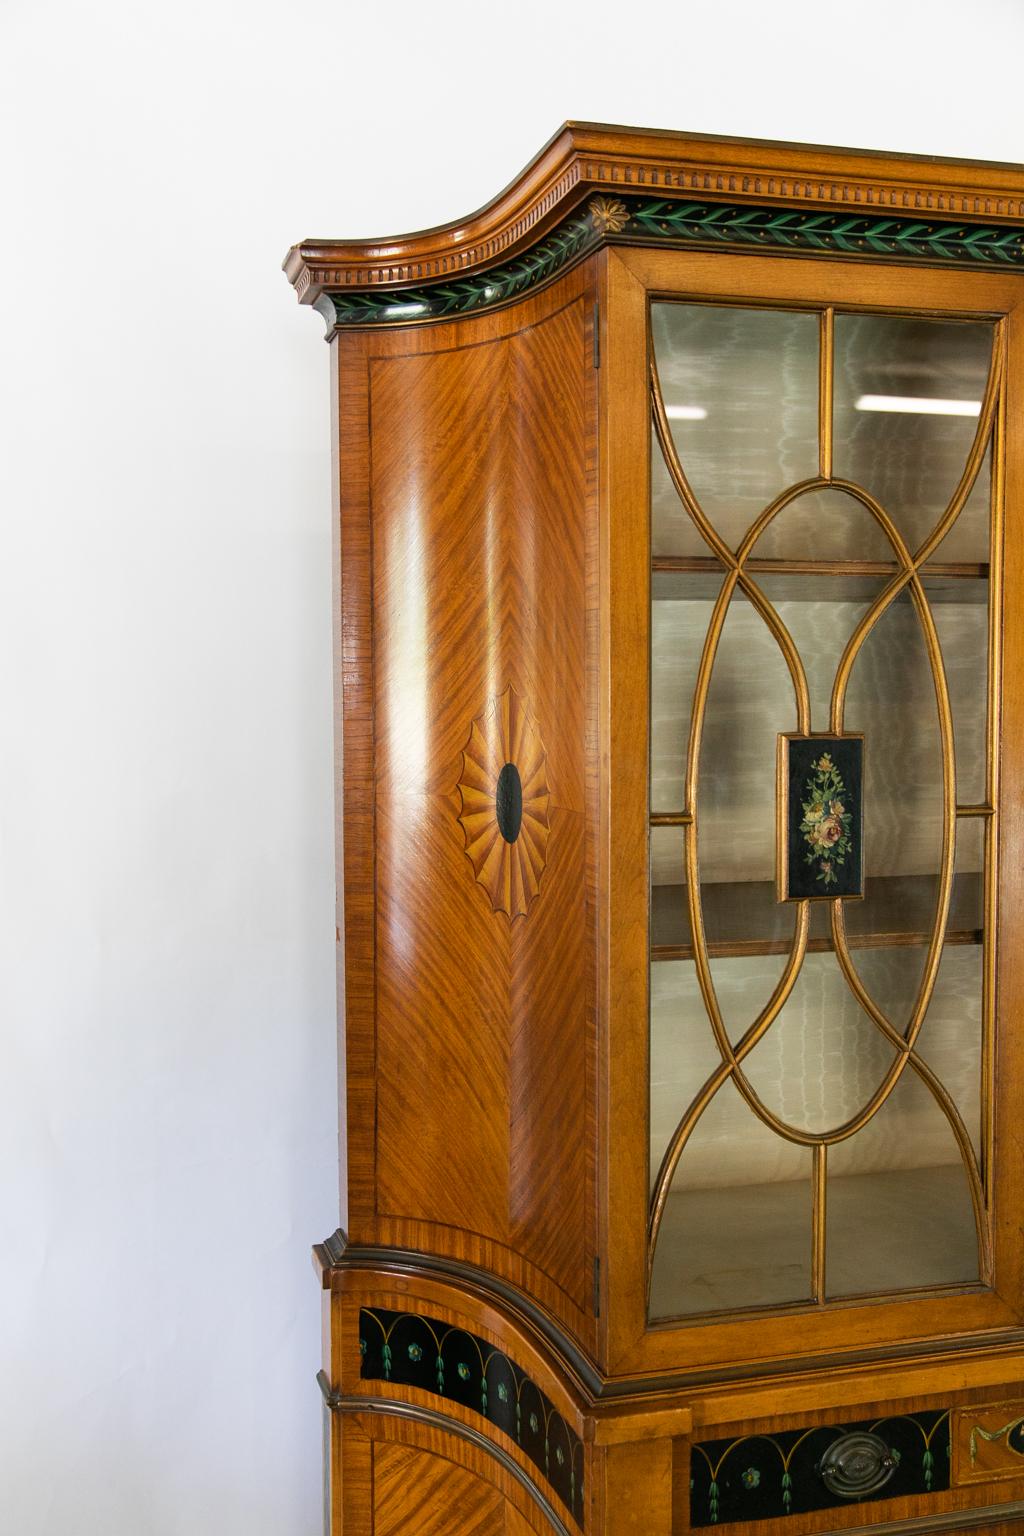 American Adam style satinwood cabinet, has curved window muntins with floral painted center panels. The lower portion has bookmatched satinwood veneer and interior pull our shelves, the entirety painted in the style of Robert Adam.
   